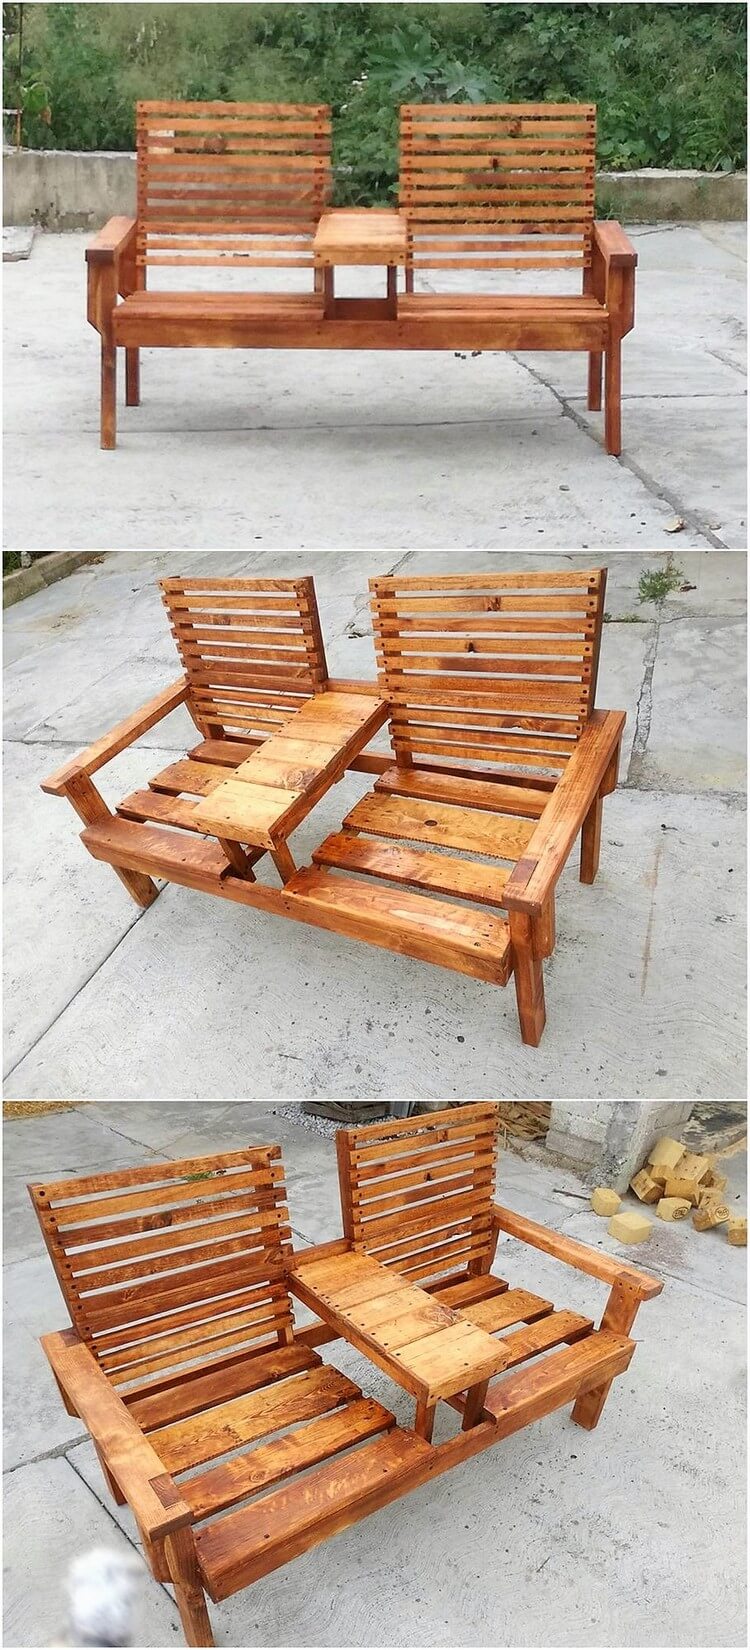 Amazing Things Made with Old Pallets | Recycled Crafts